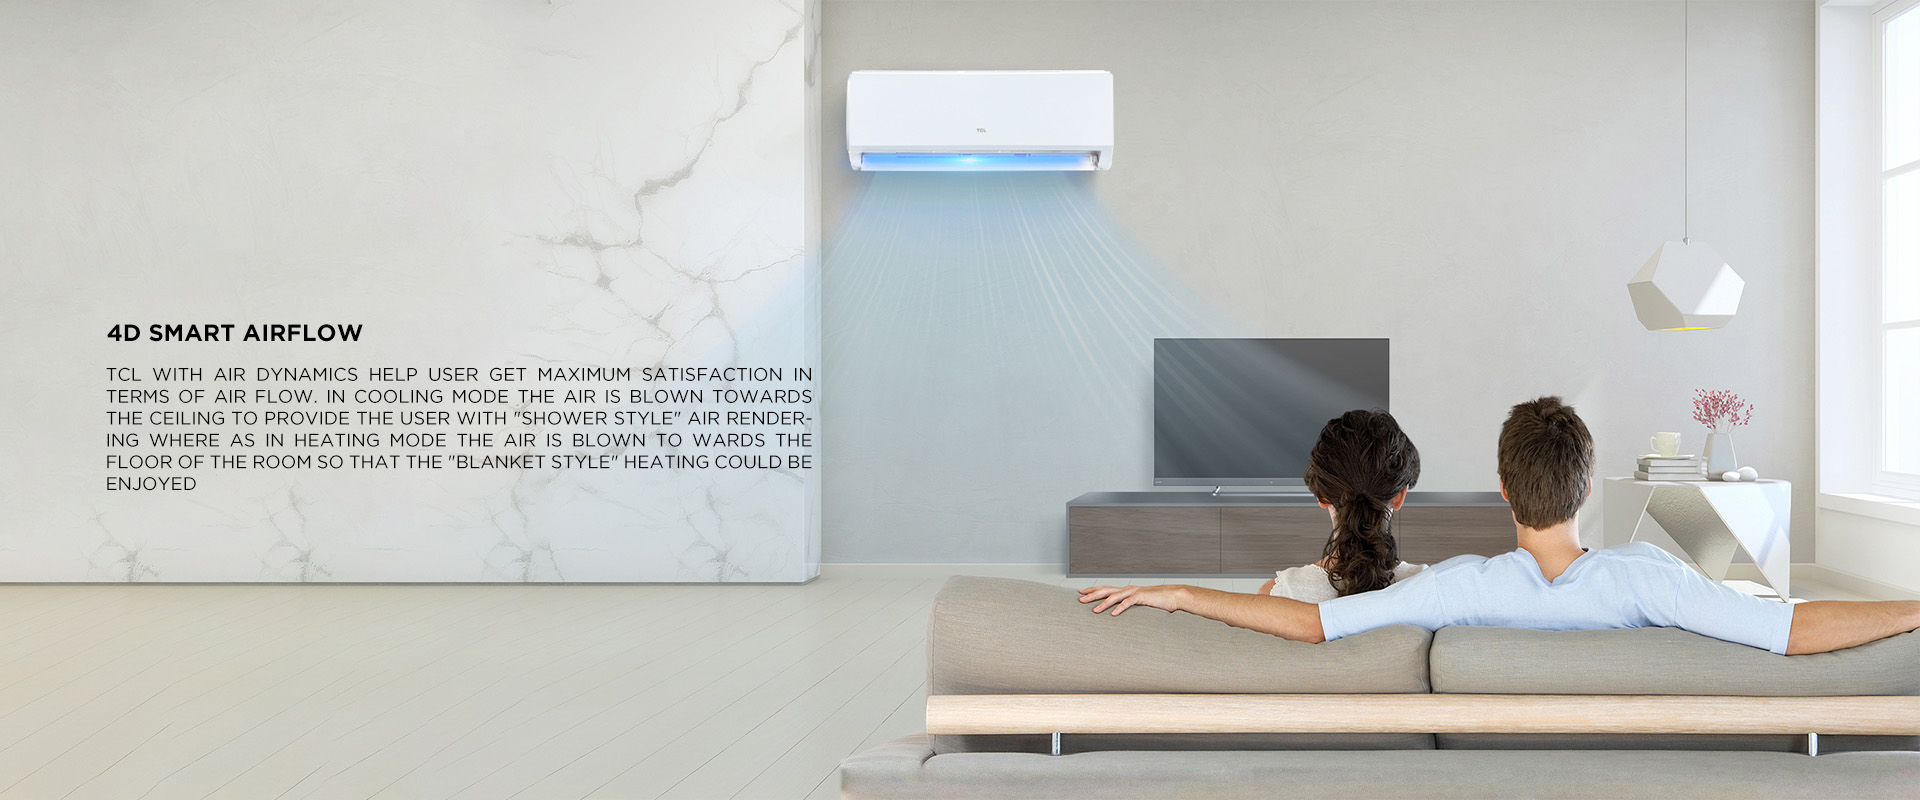  TCL with air dynamics help user get maximum satisfaction in terms of air flow. In Cooling mode the air is blown towards the ceiling to provide the user with (Shower style) air rendering where as in Heating mode the air is blown to wards the floor of the room so that the (Blanket style) heating could be enjoyed 